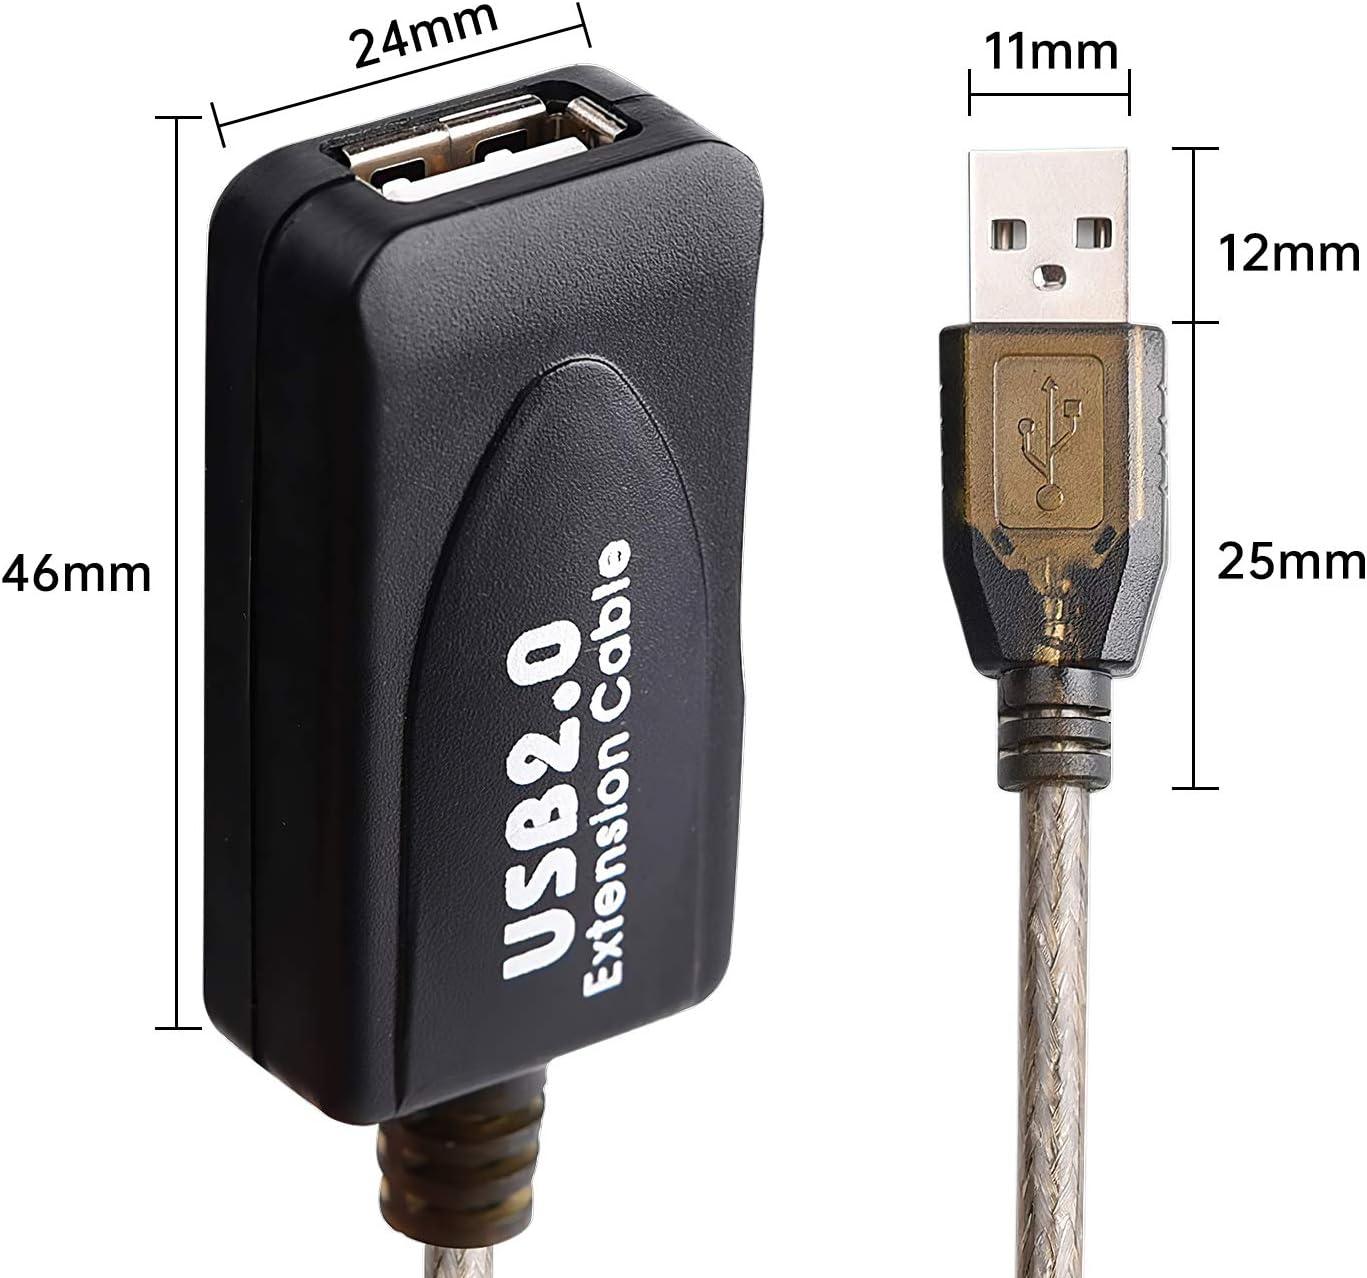 LDKCOK USB 2.0 Type A Male to A Female Active Repeater Extension Cable 100ft  High Speed 480 Mbps 